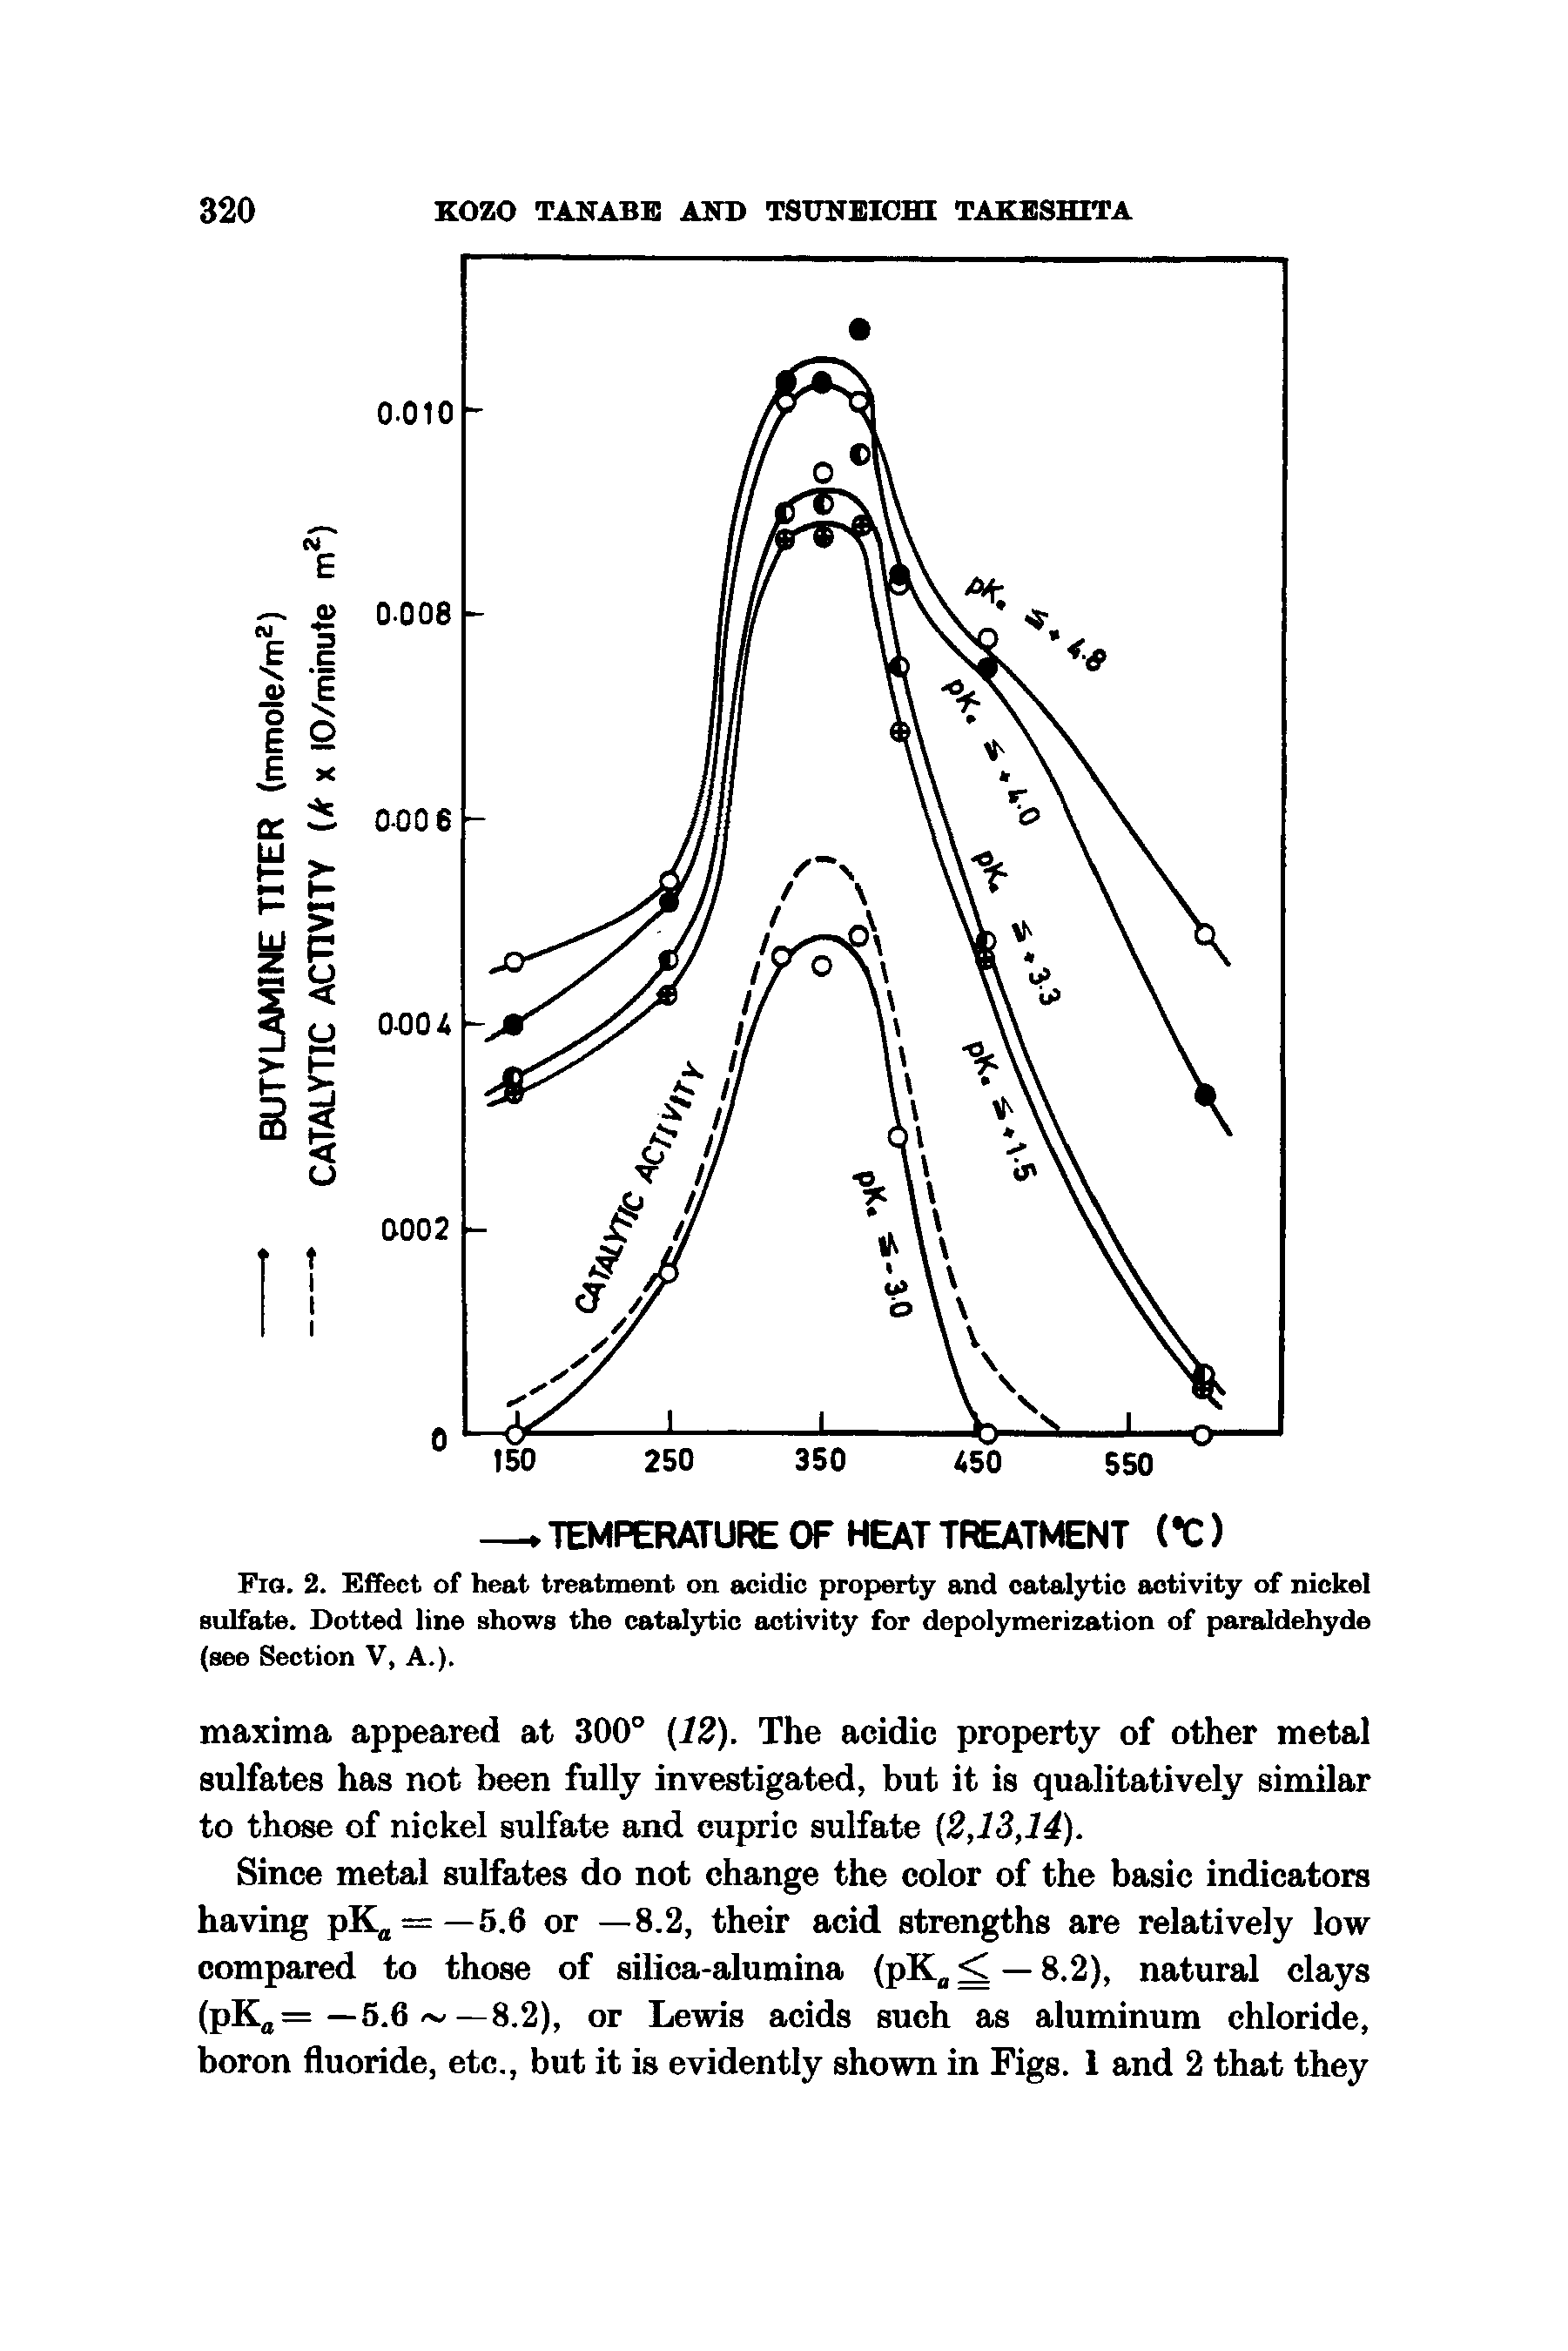 Fig. 2. Effect of heat treatment on acidic property and catalytic activity of nickel sulfate. Dotted line shows the catalytic activity for depolymerization of paraldehyde (see Section V, A.).